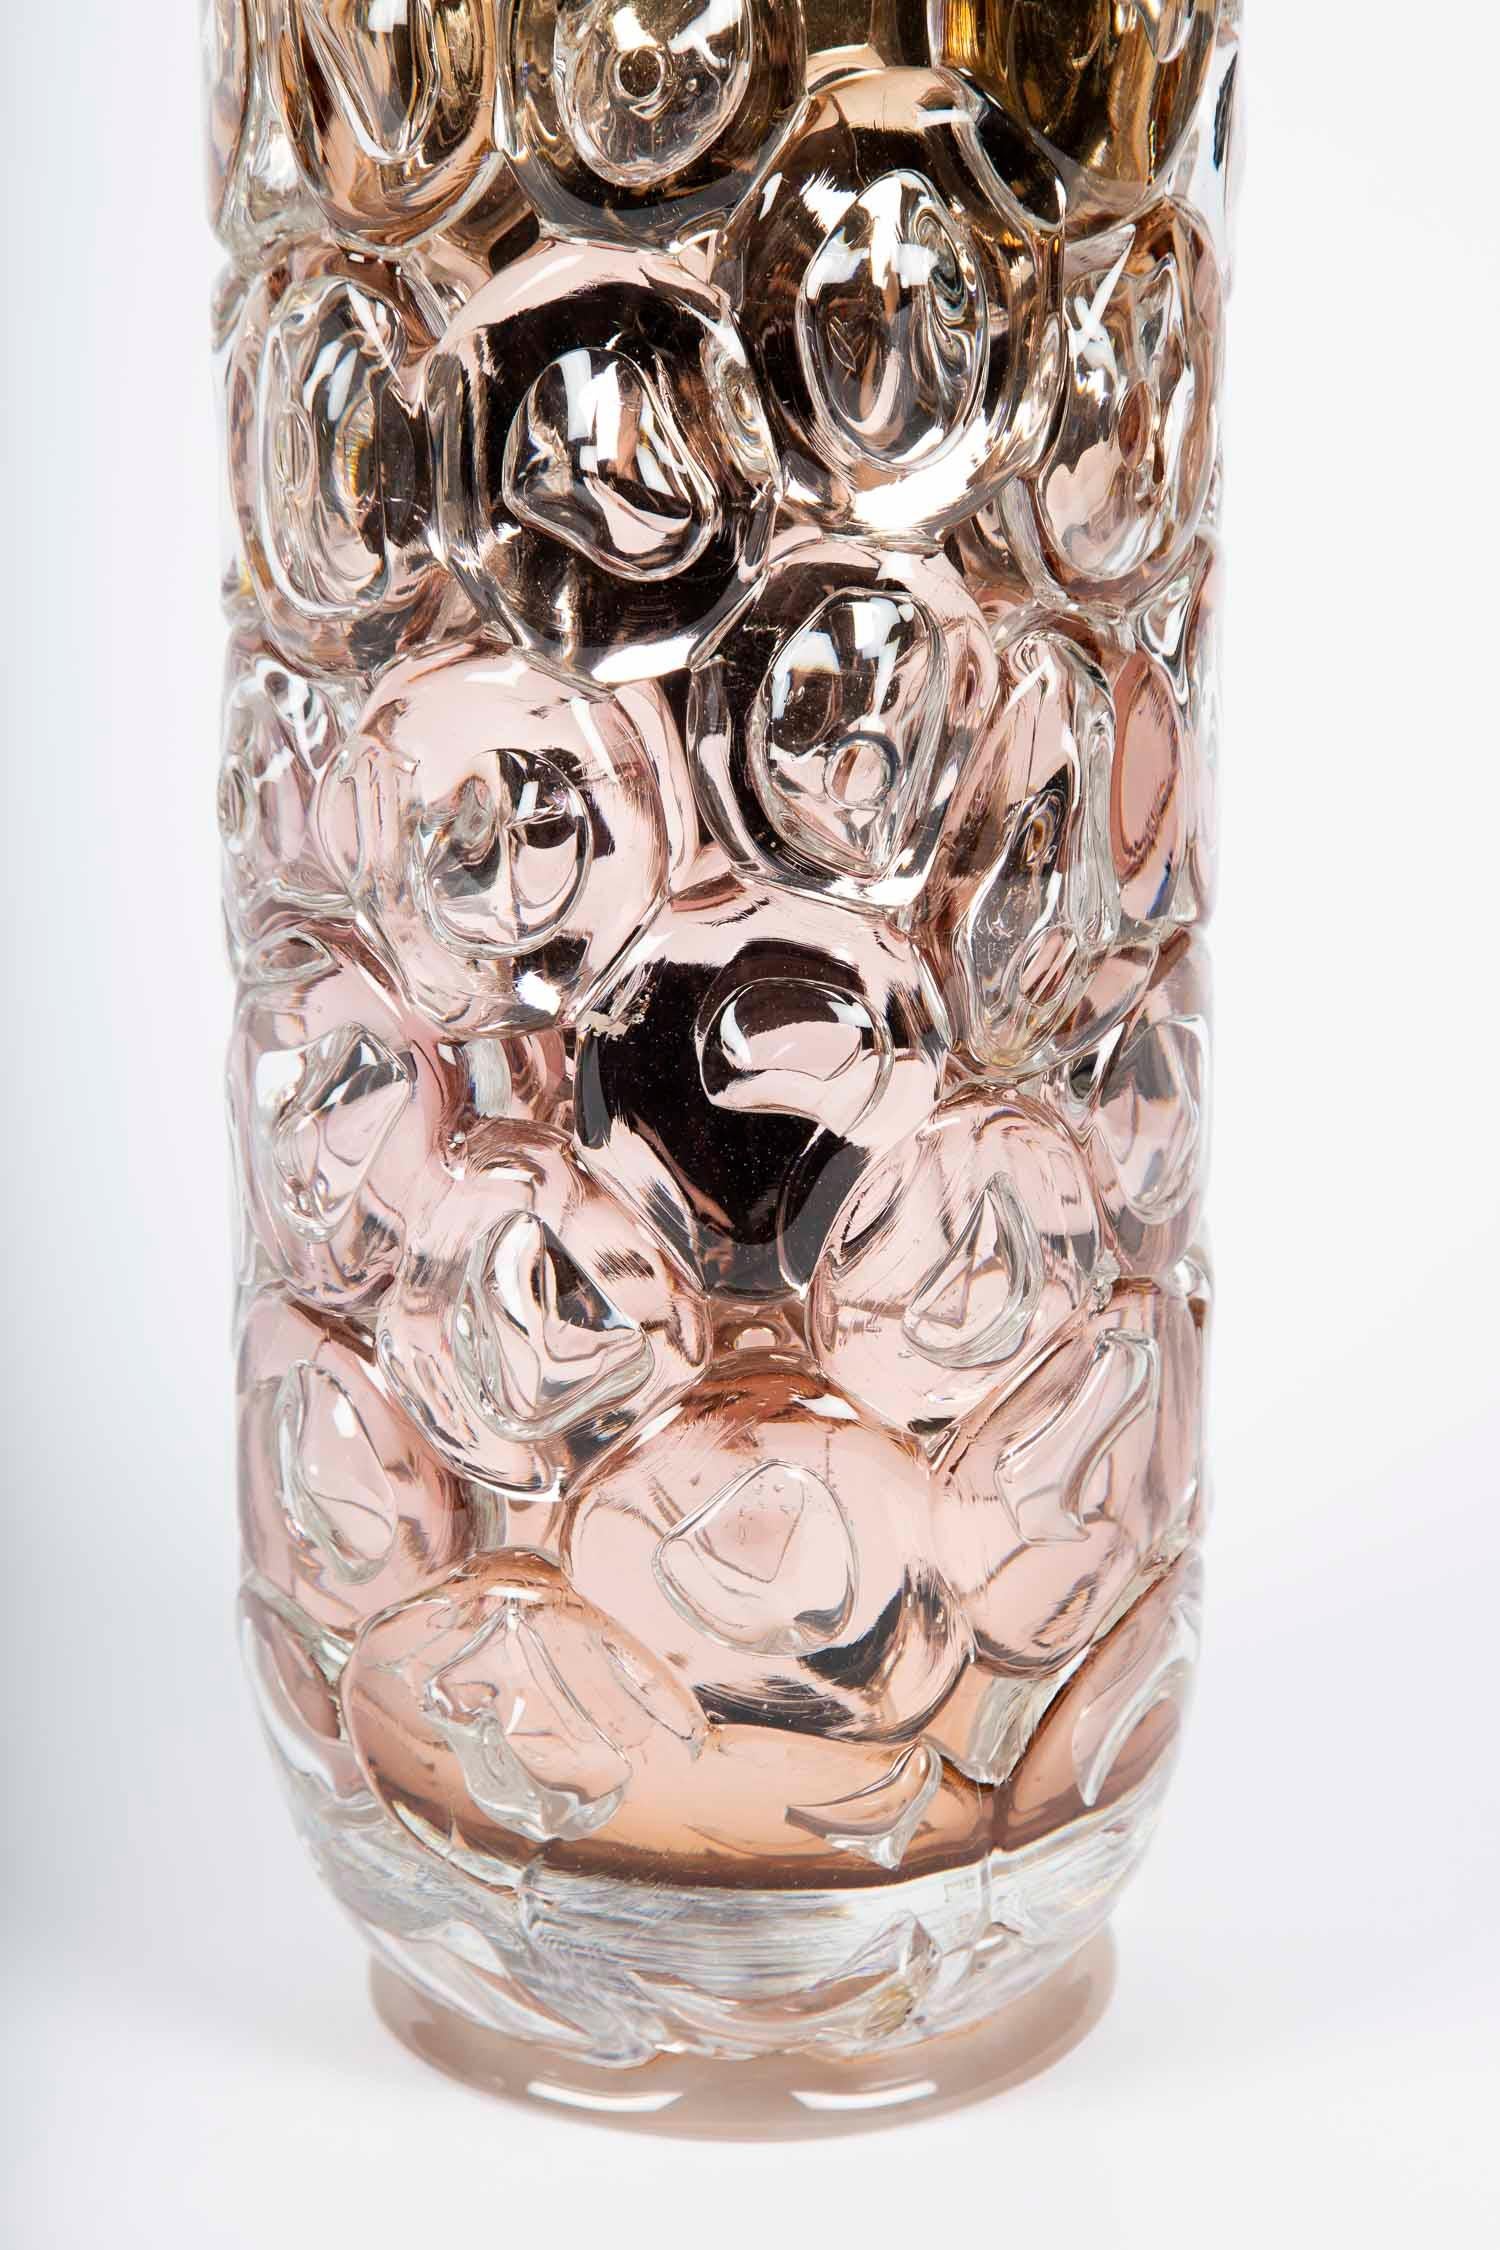 British Bubblewrap in Gold, a Unique pink, gold & silver glass Vase by Allister Malcolm